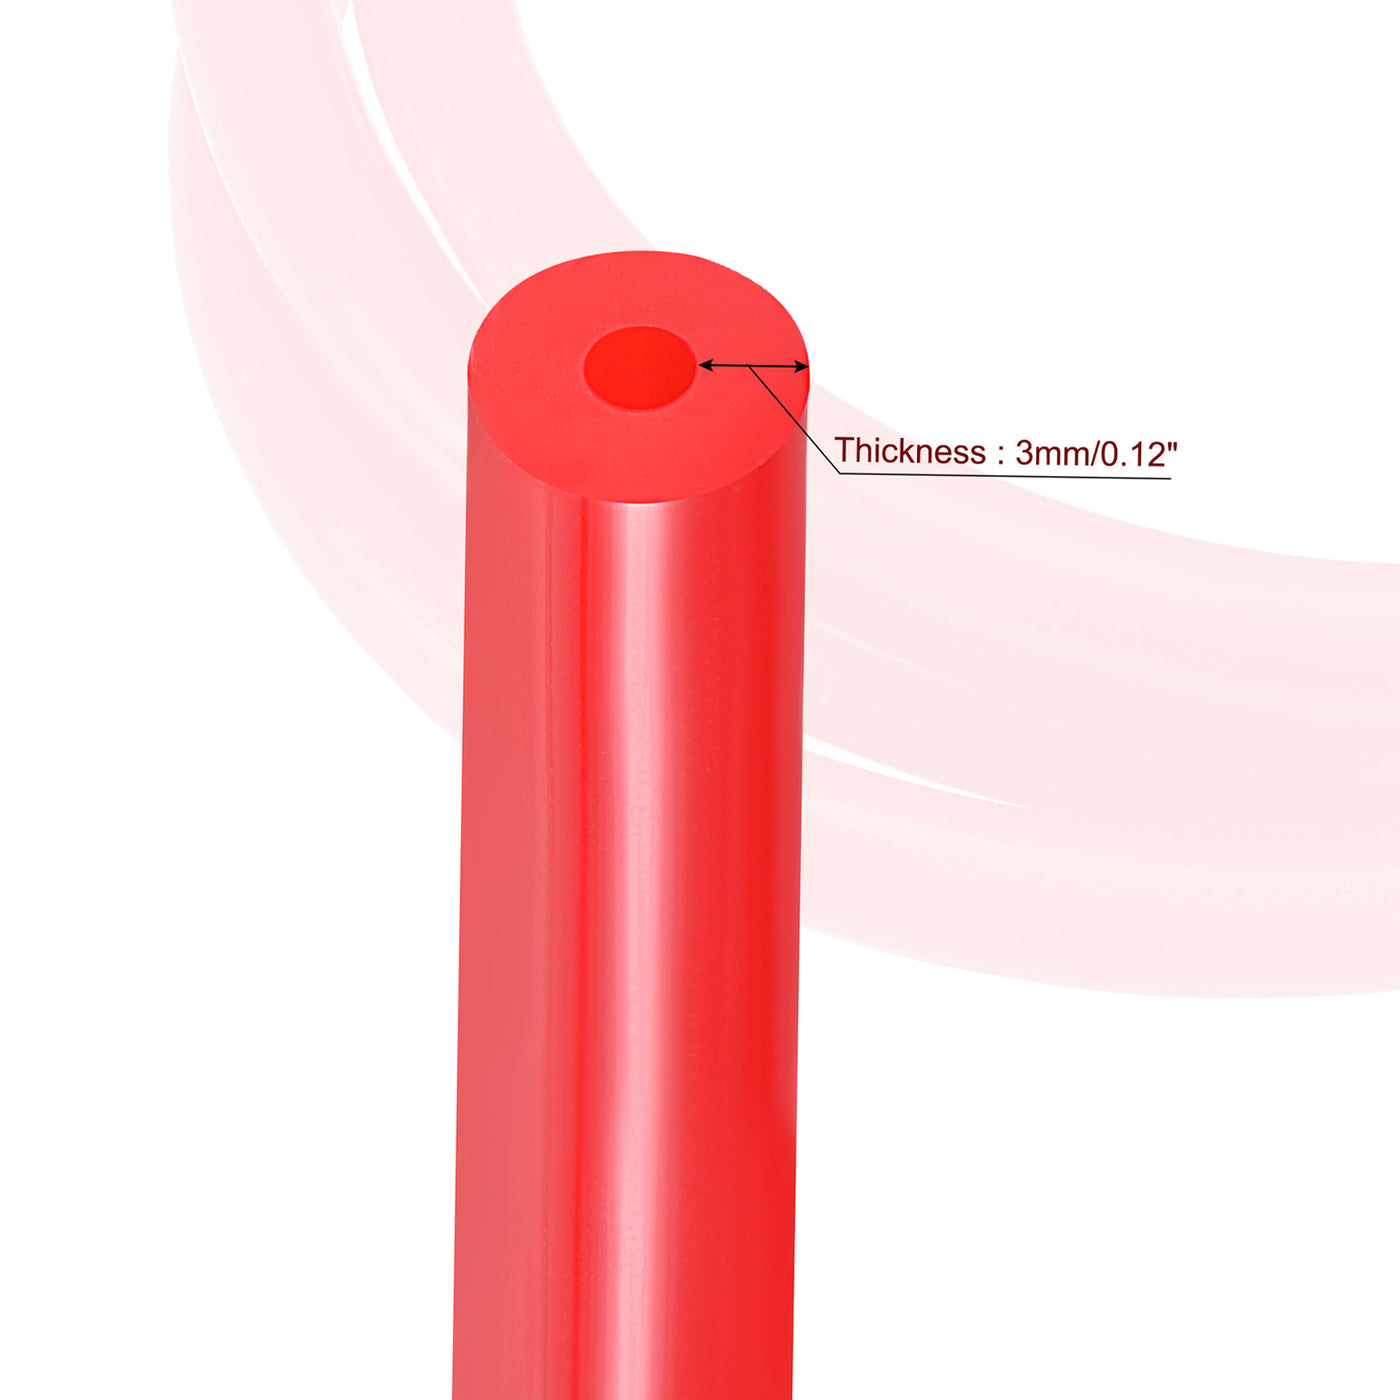 Harfington Vacuum Silicone Tubing Hose 1/8" 5/32" 3/16" 1/4" 5/16" 3/8" 1/2" ID 1/8" Wall Thick 6.6ft Red High Temperature for Engine